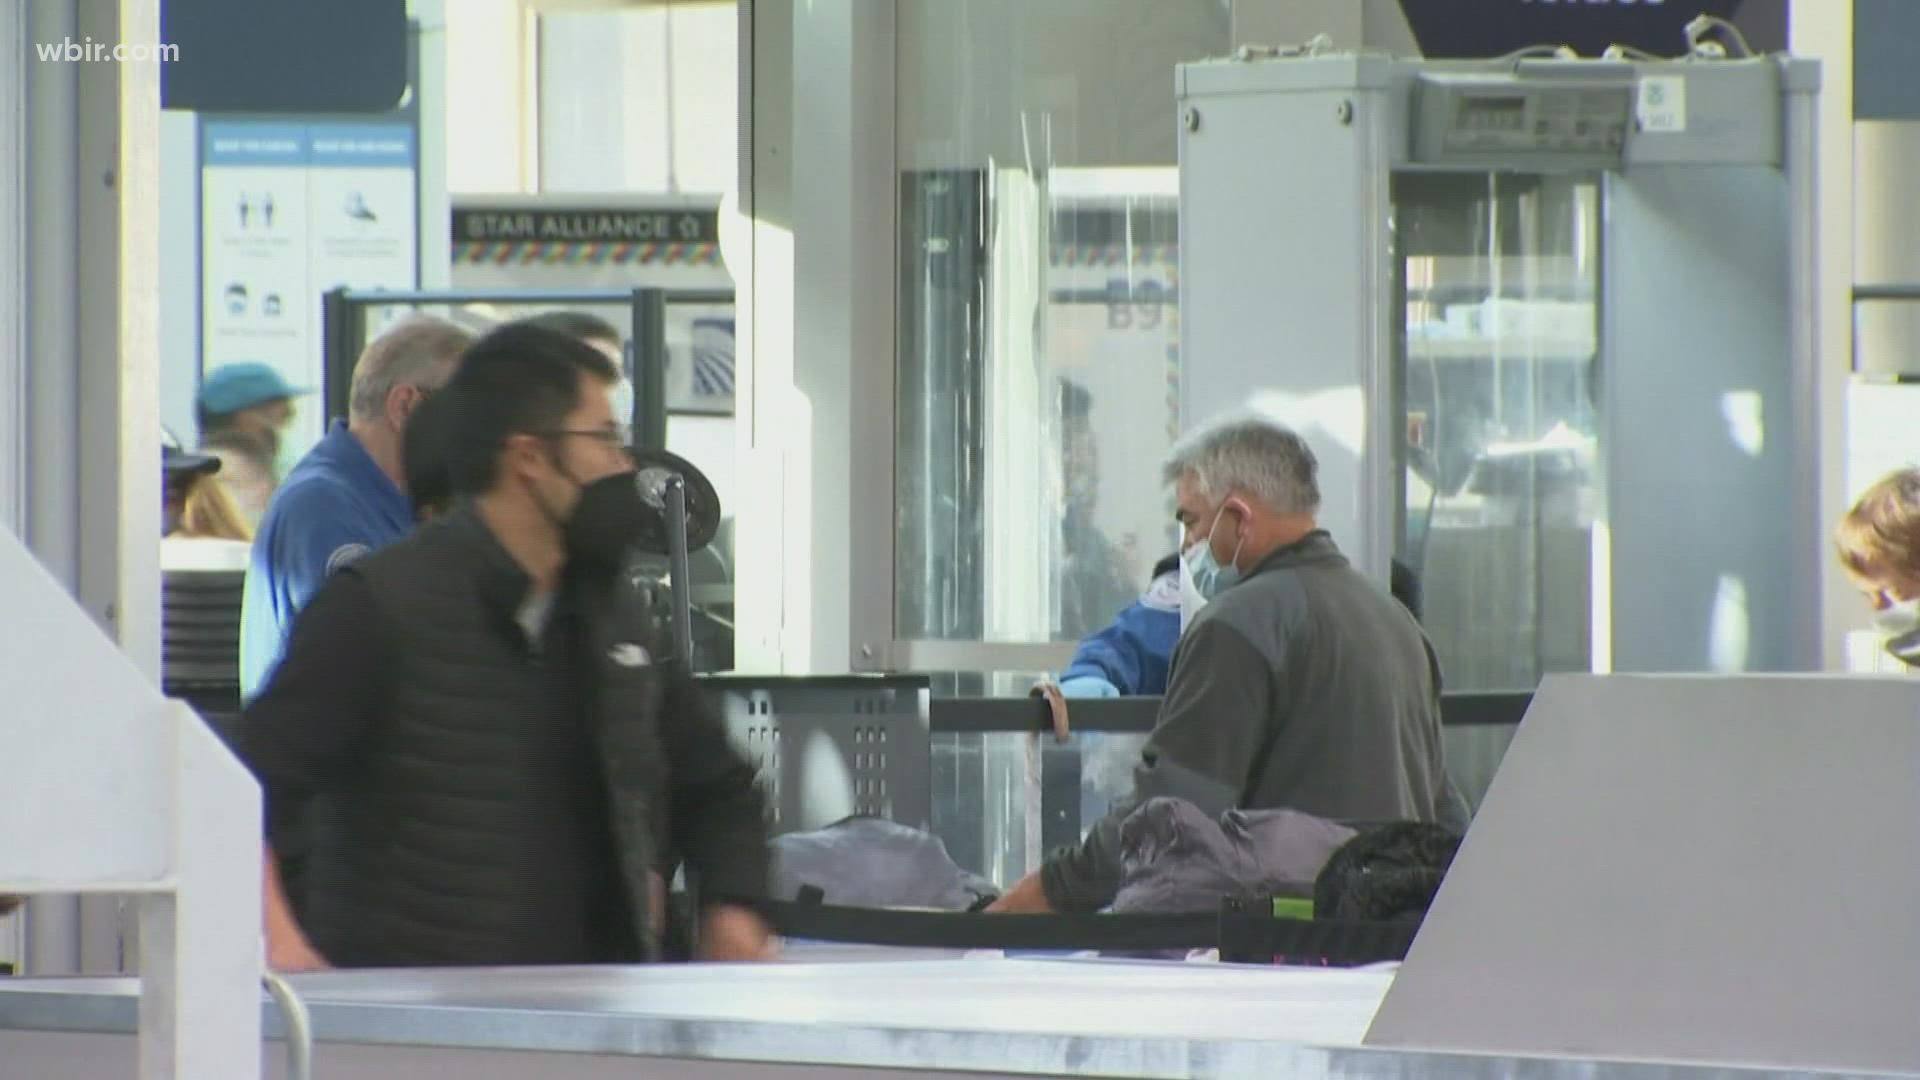 Nearly 1,800 TSA agents are out of work because of COVID-19.